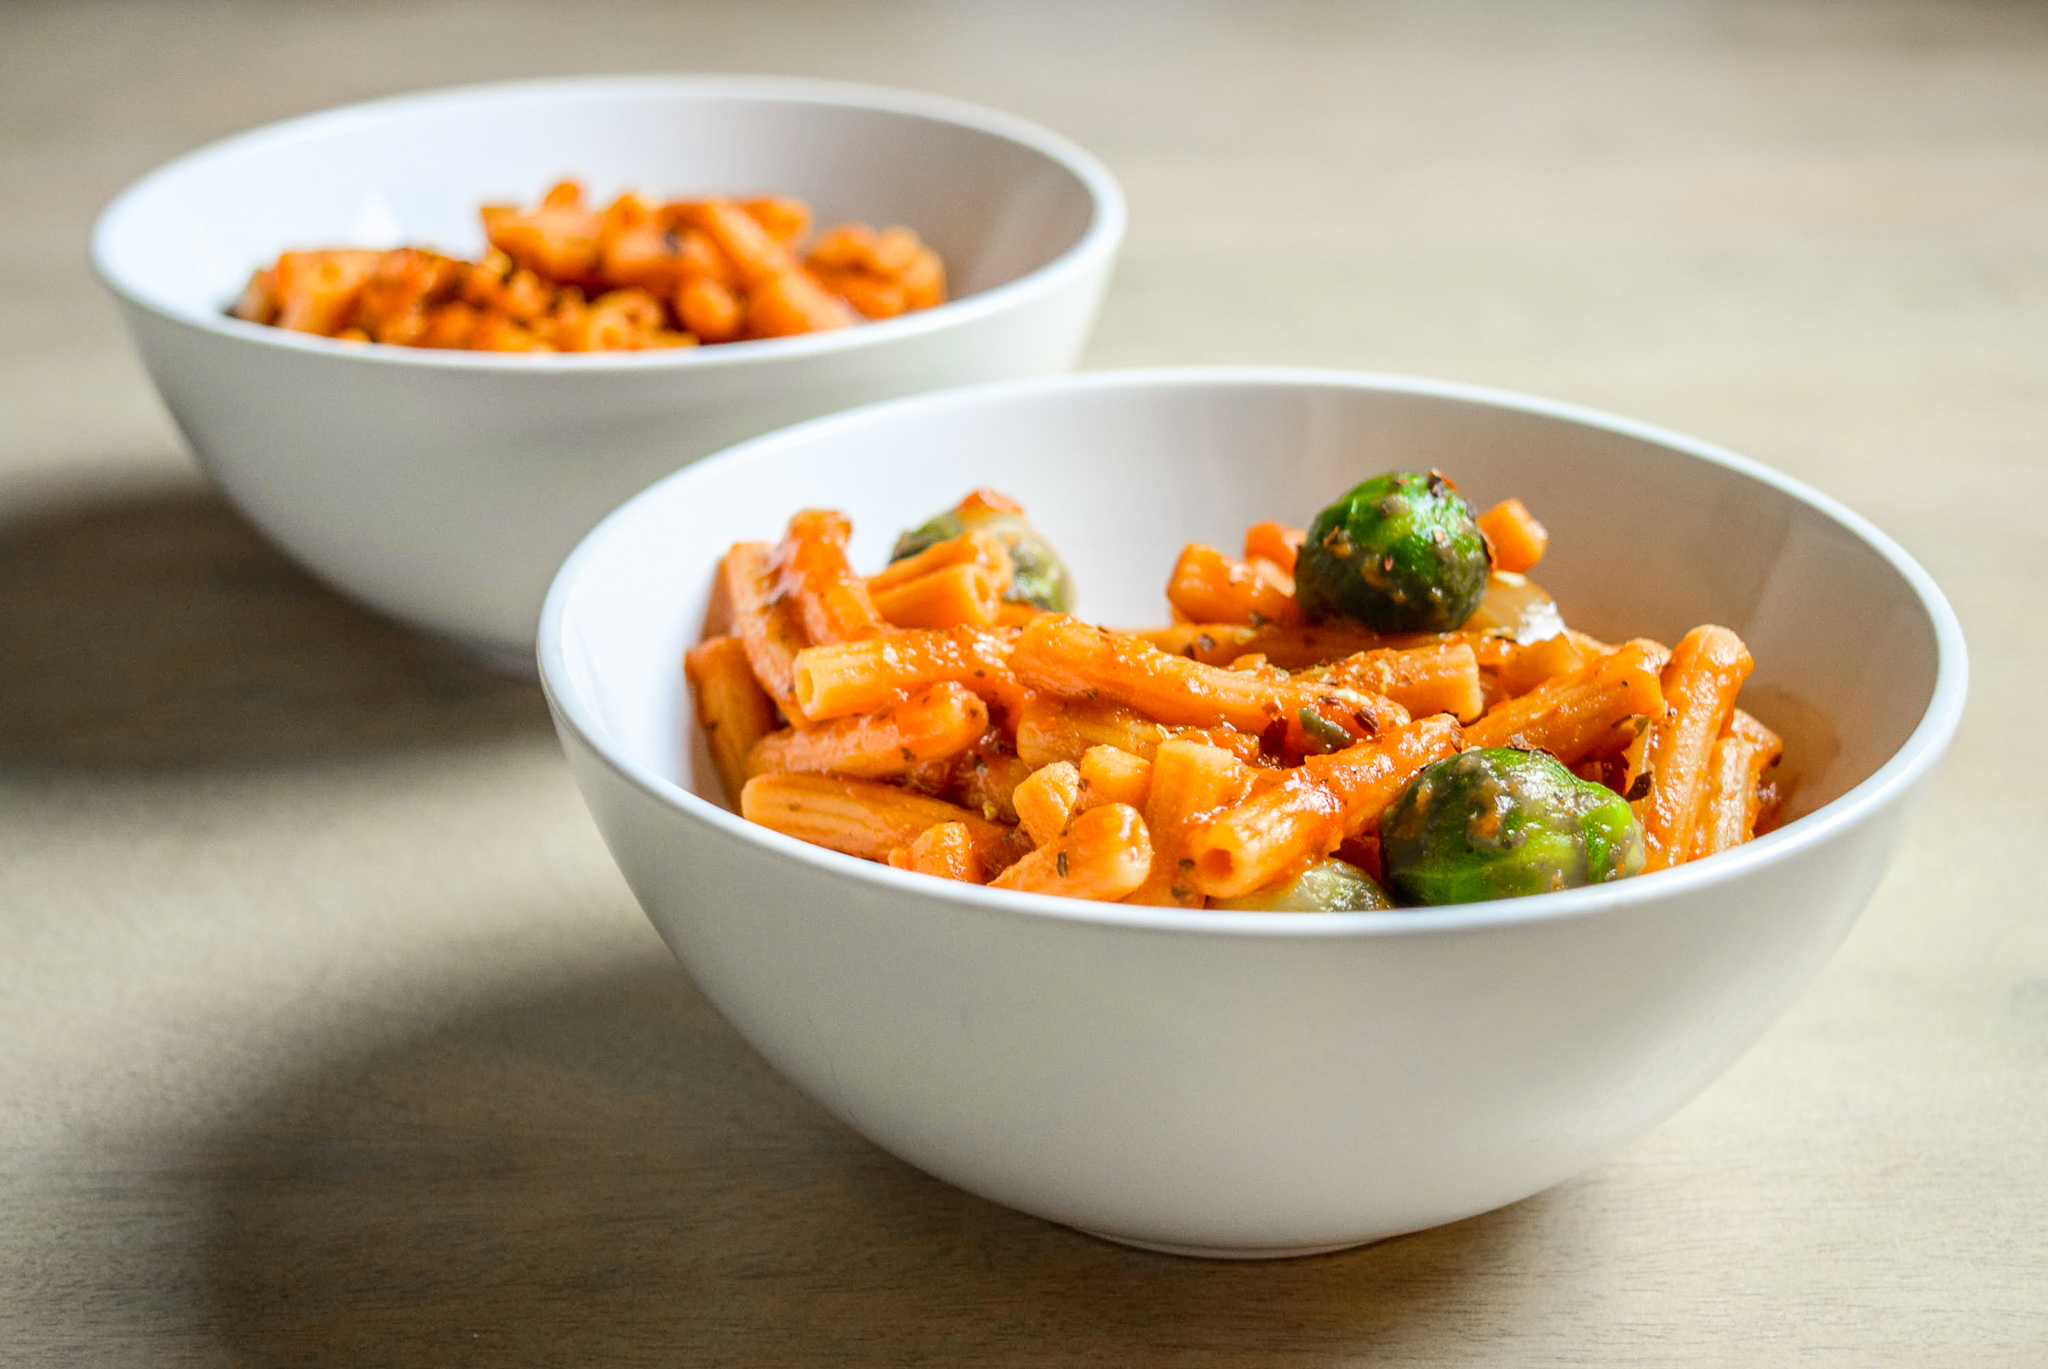 Finished Protein-Packed Red Lentil Pasta with Marinara, Brussel Sprouts, and Caramelized Onions in two bowls